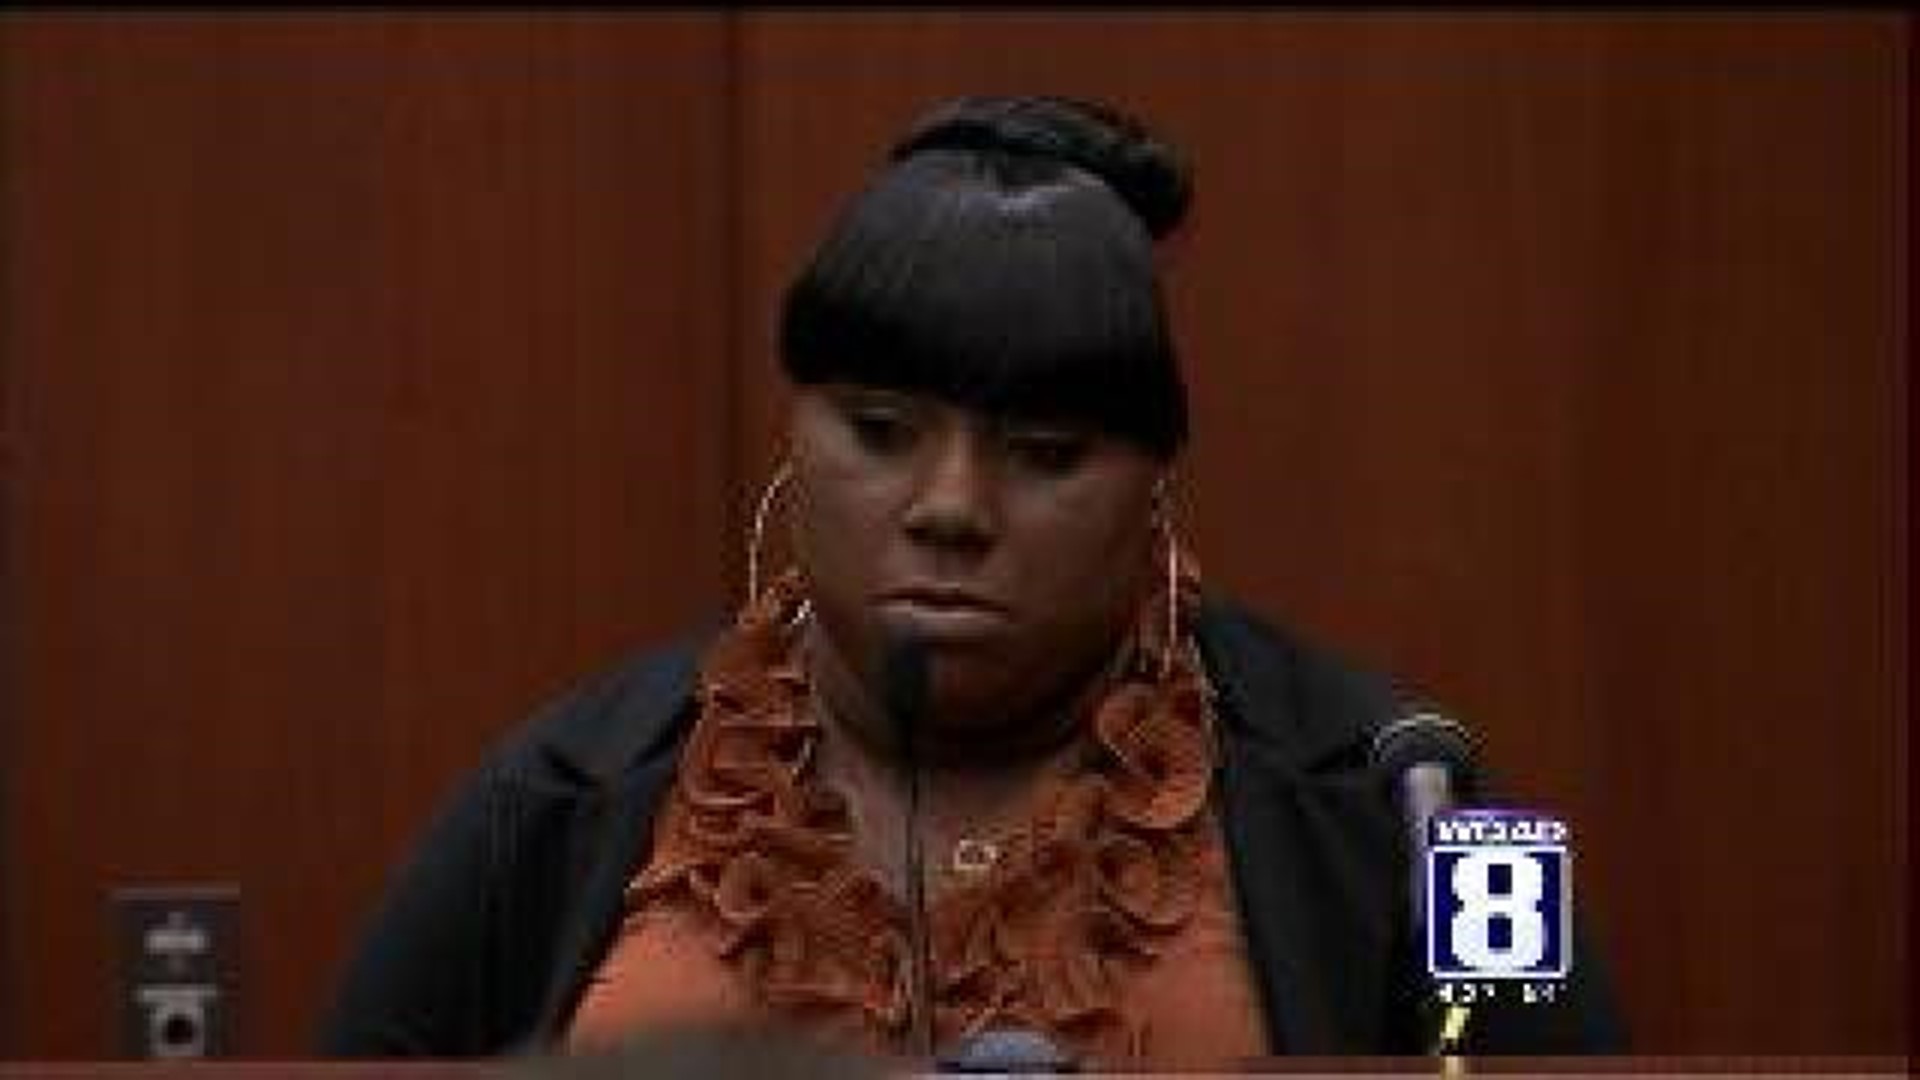 Rachel Jeantel takes the witness stand in the George Zimmerman trial